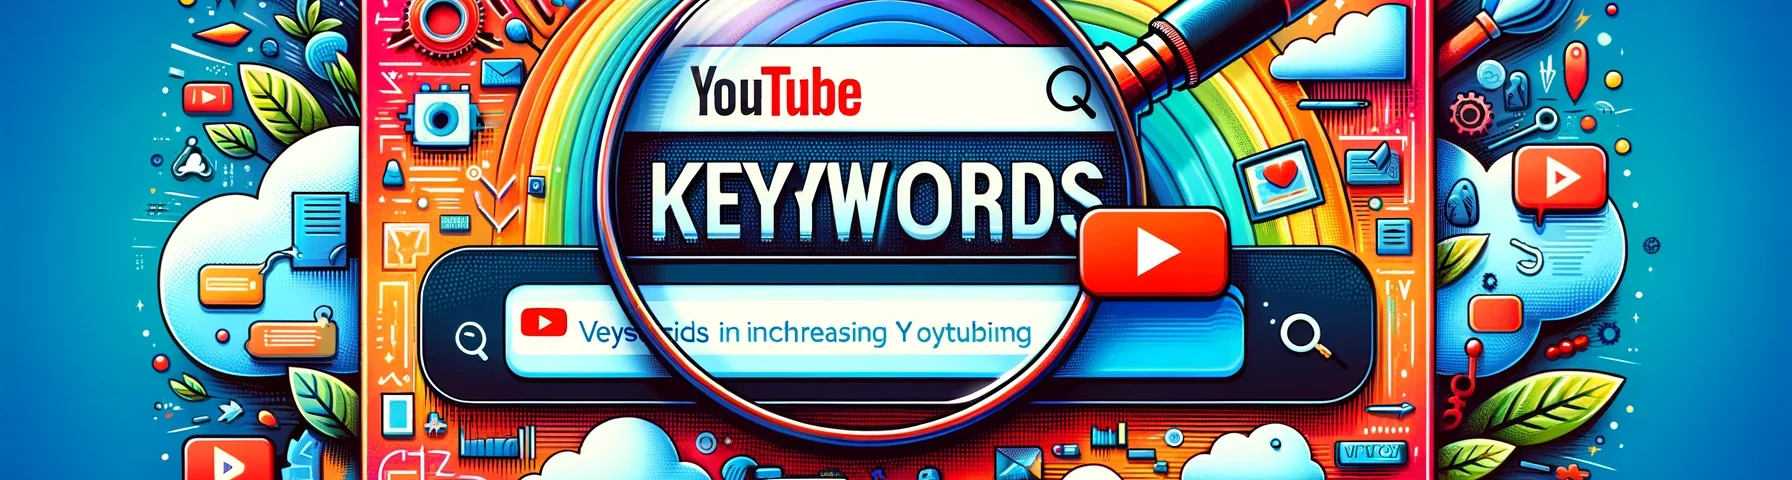 role of keywords in YouTube